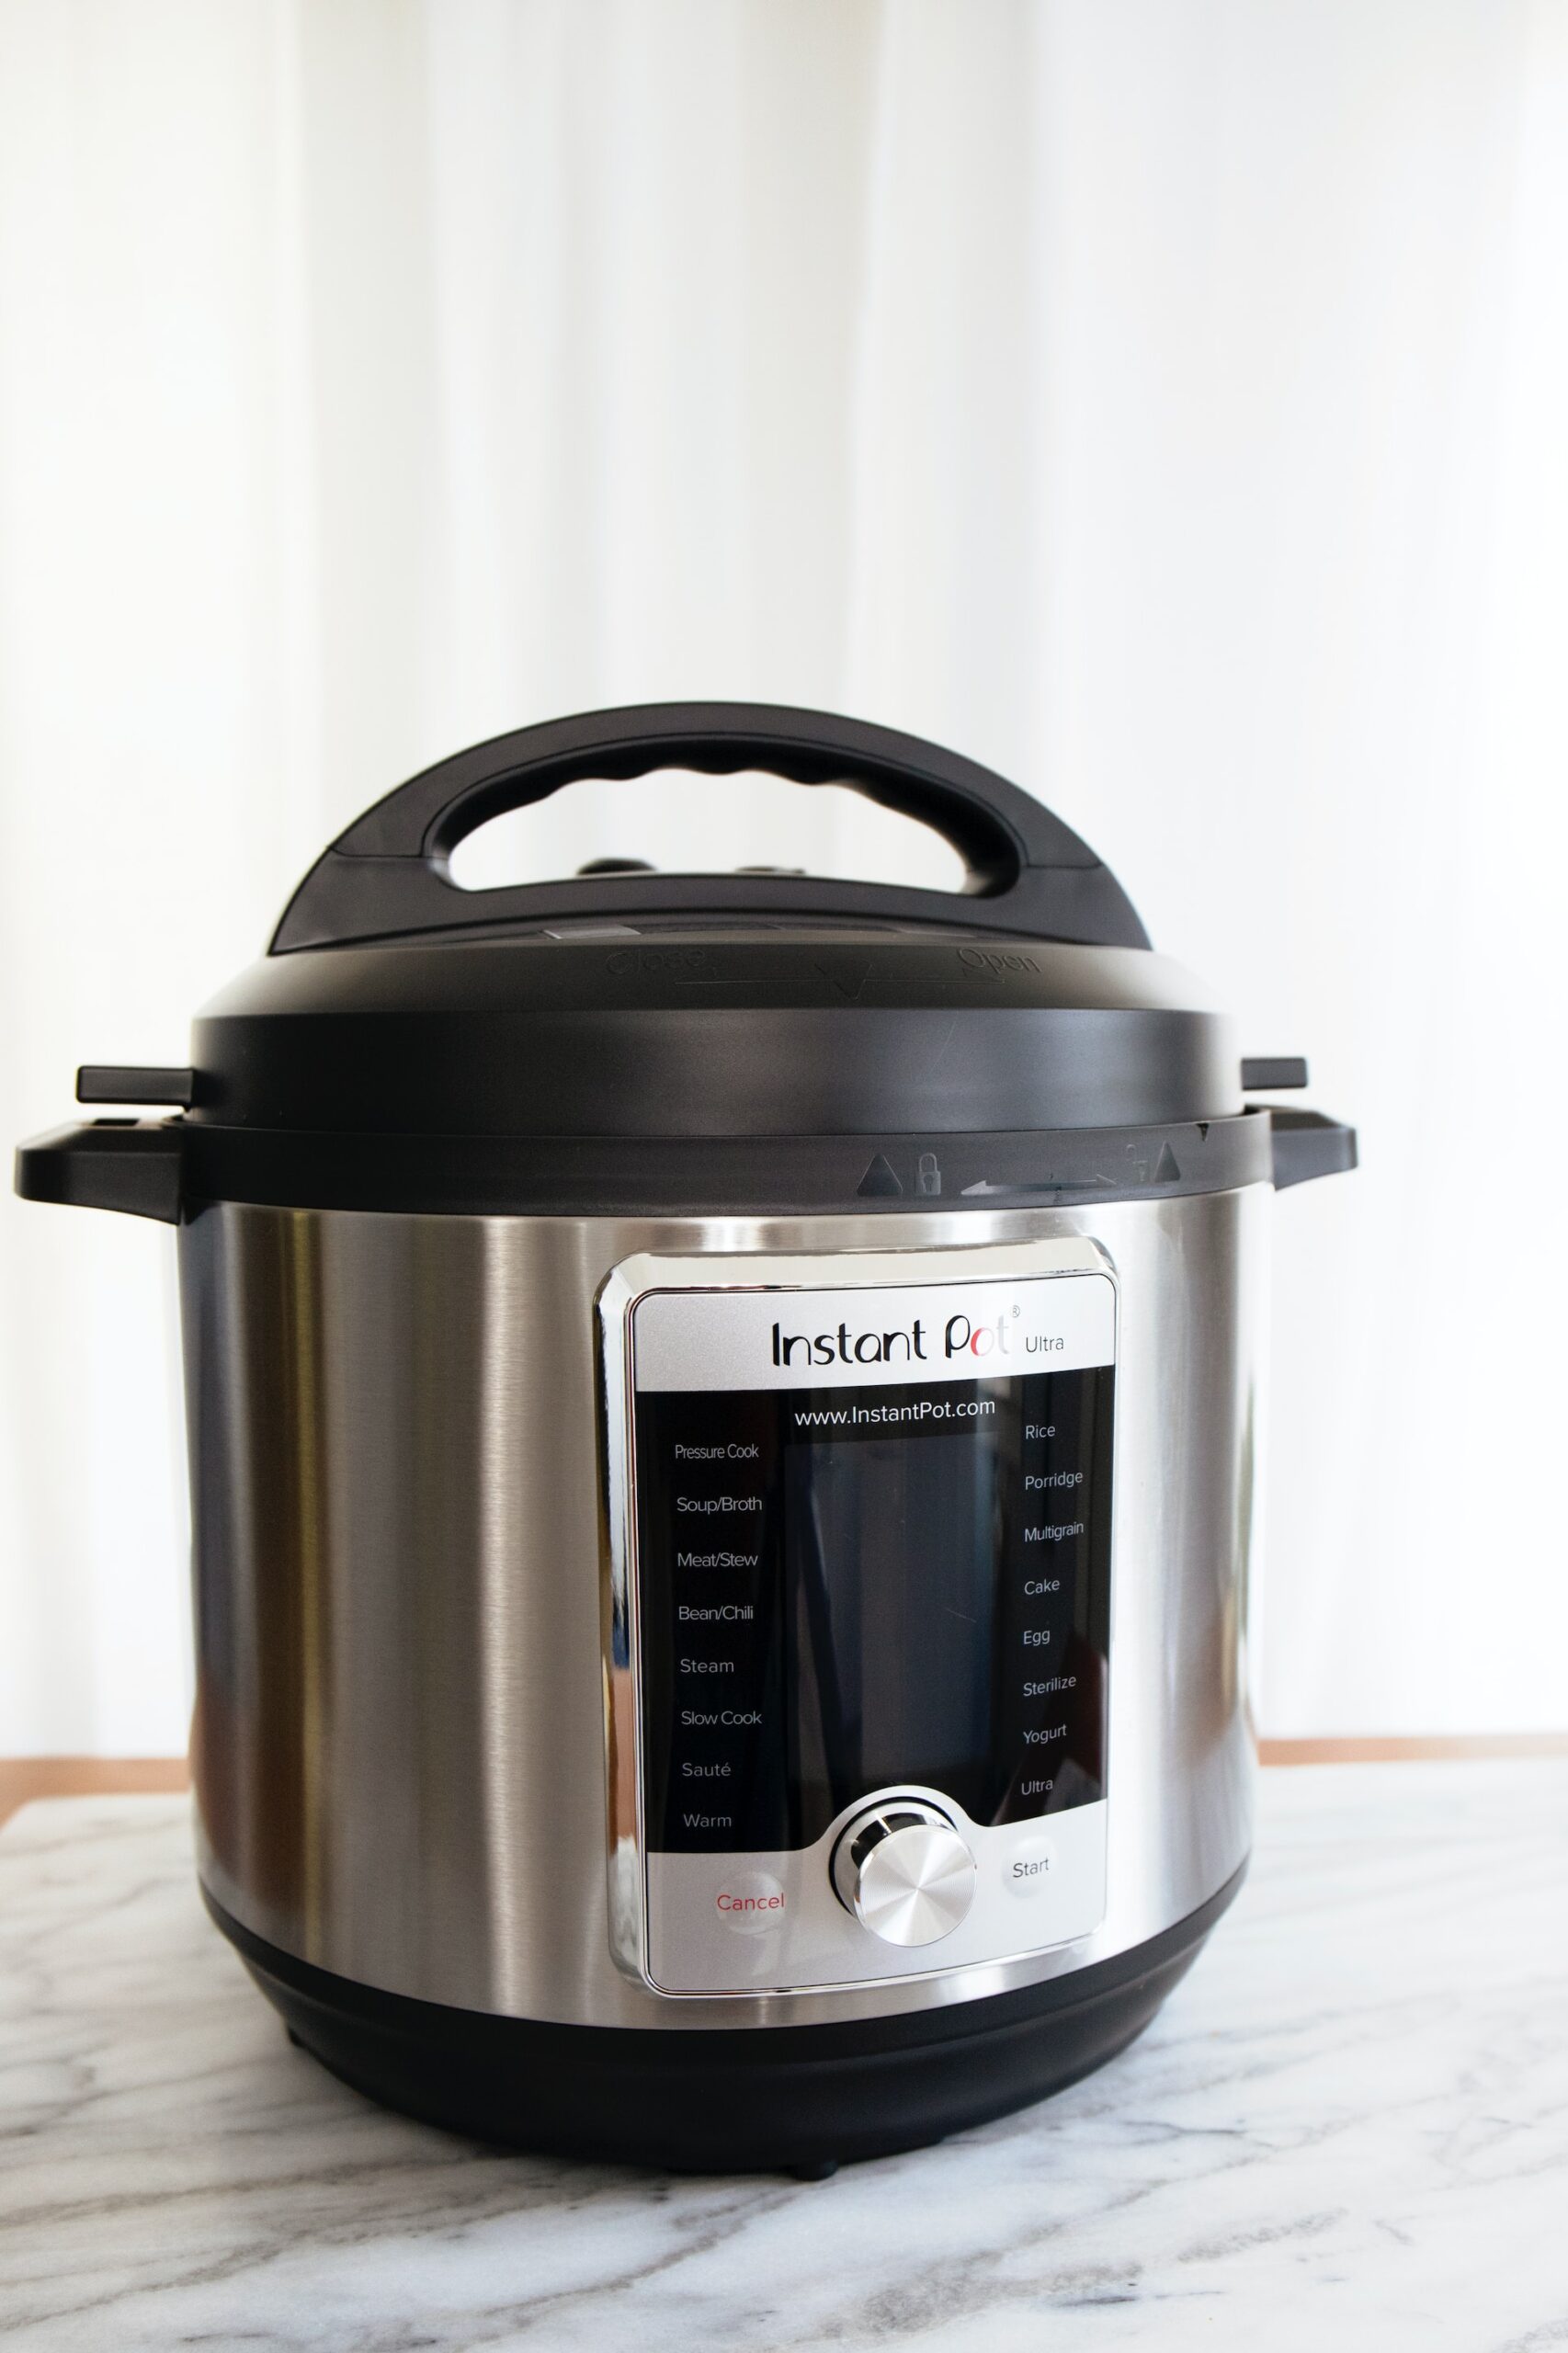 https://ditchthewheat.com/wp-content/uploads/2022/10/Instant-Pot-Cooking-Times-Cheat-Sheet-3-scaled.jpg